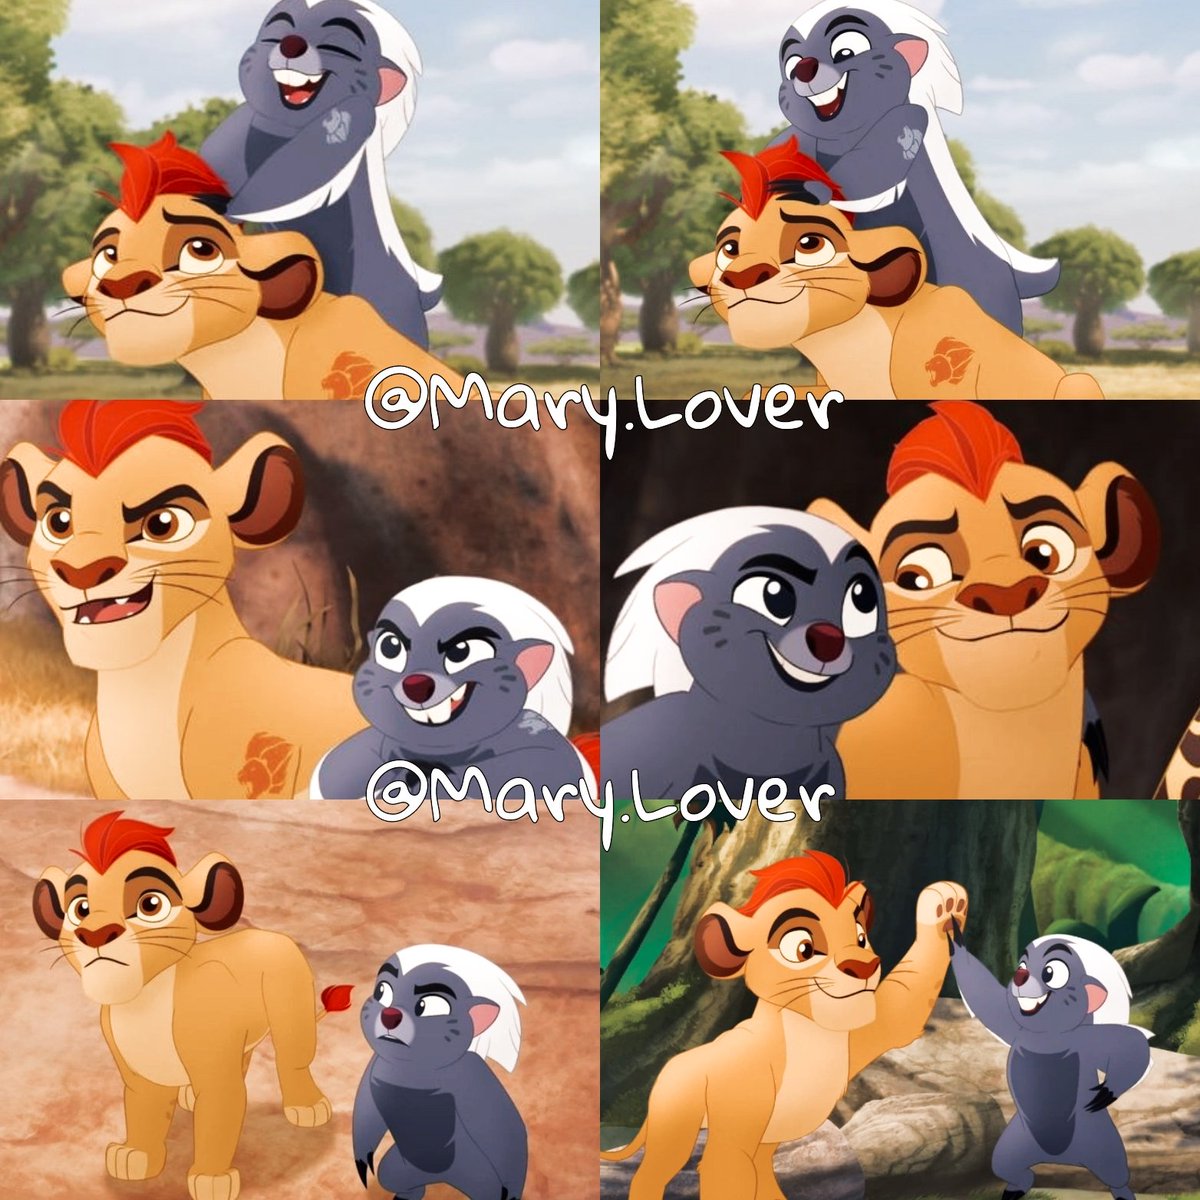 #NationalBestFriendsDay 

Today is friend's day.  Kion has a great friend who is Bunga.  your best friend ❤💙🐾⚡✨

♡♡»»————>(◍•ᴗ•◍)<————««♡♡ 
#TheLionGuard #LionGuard #TheLionKing #LionKing #thelionguard #lionguard #thelionking #lionking ♡♡♡♡